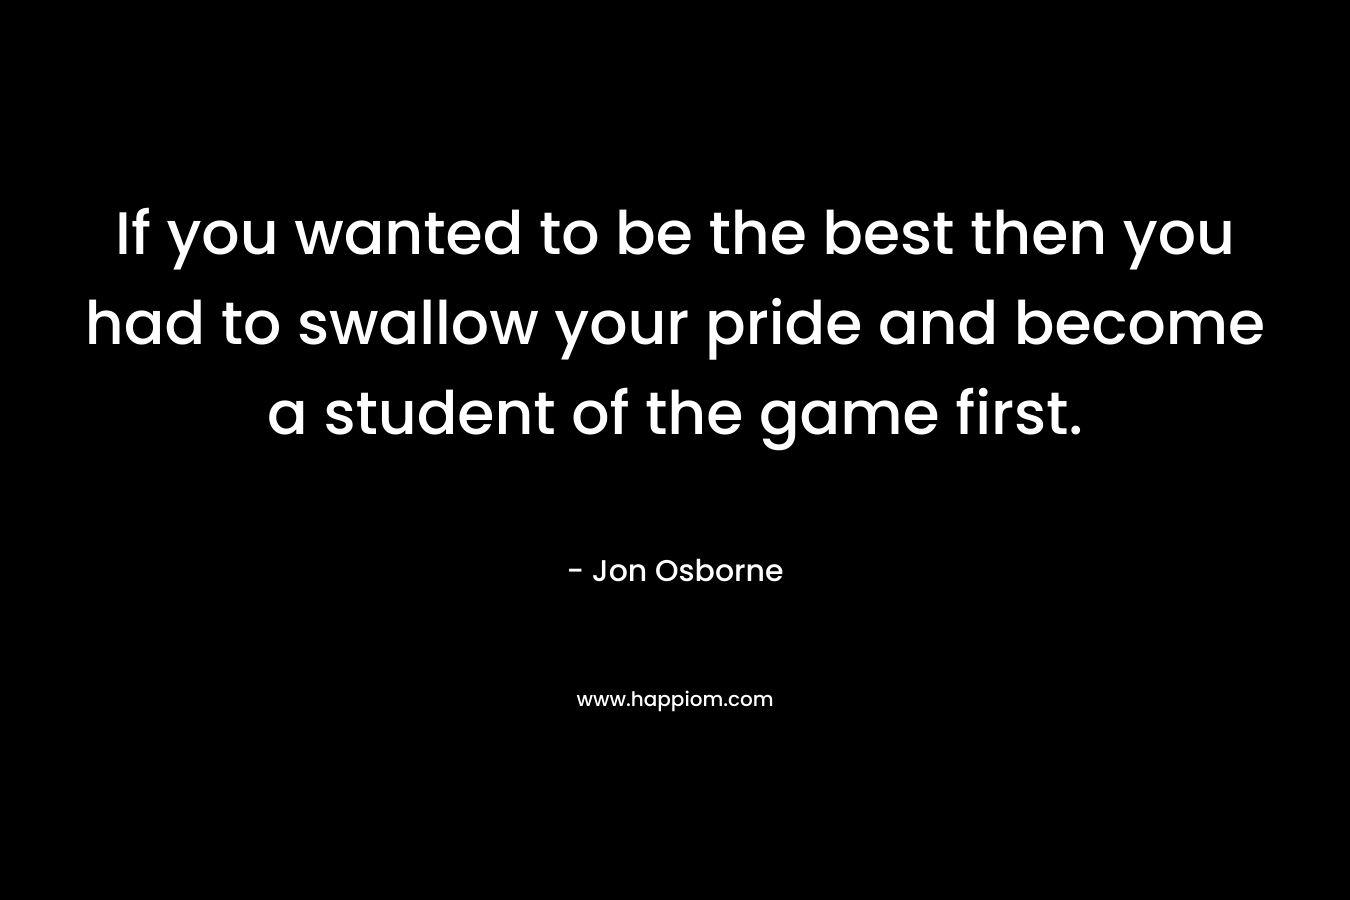 If you wanted to be the best then you had to swallow your pride and become a student of the game first.